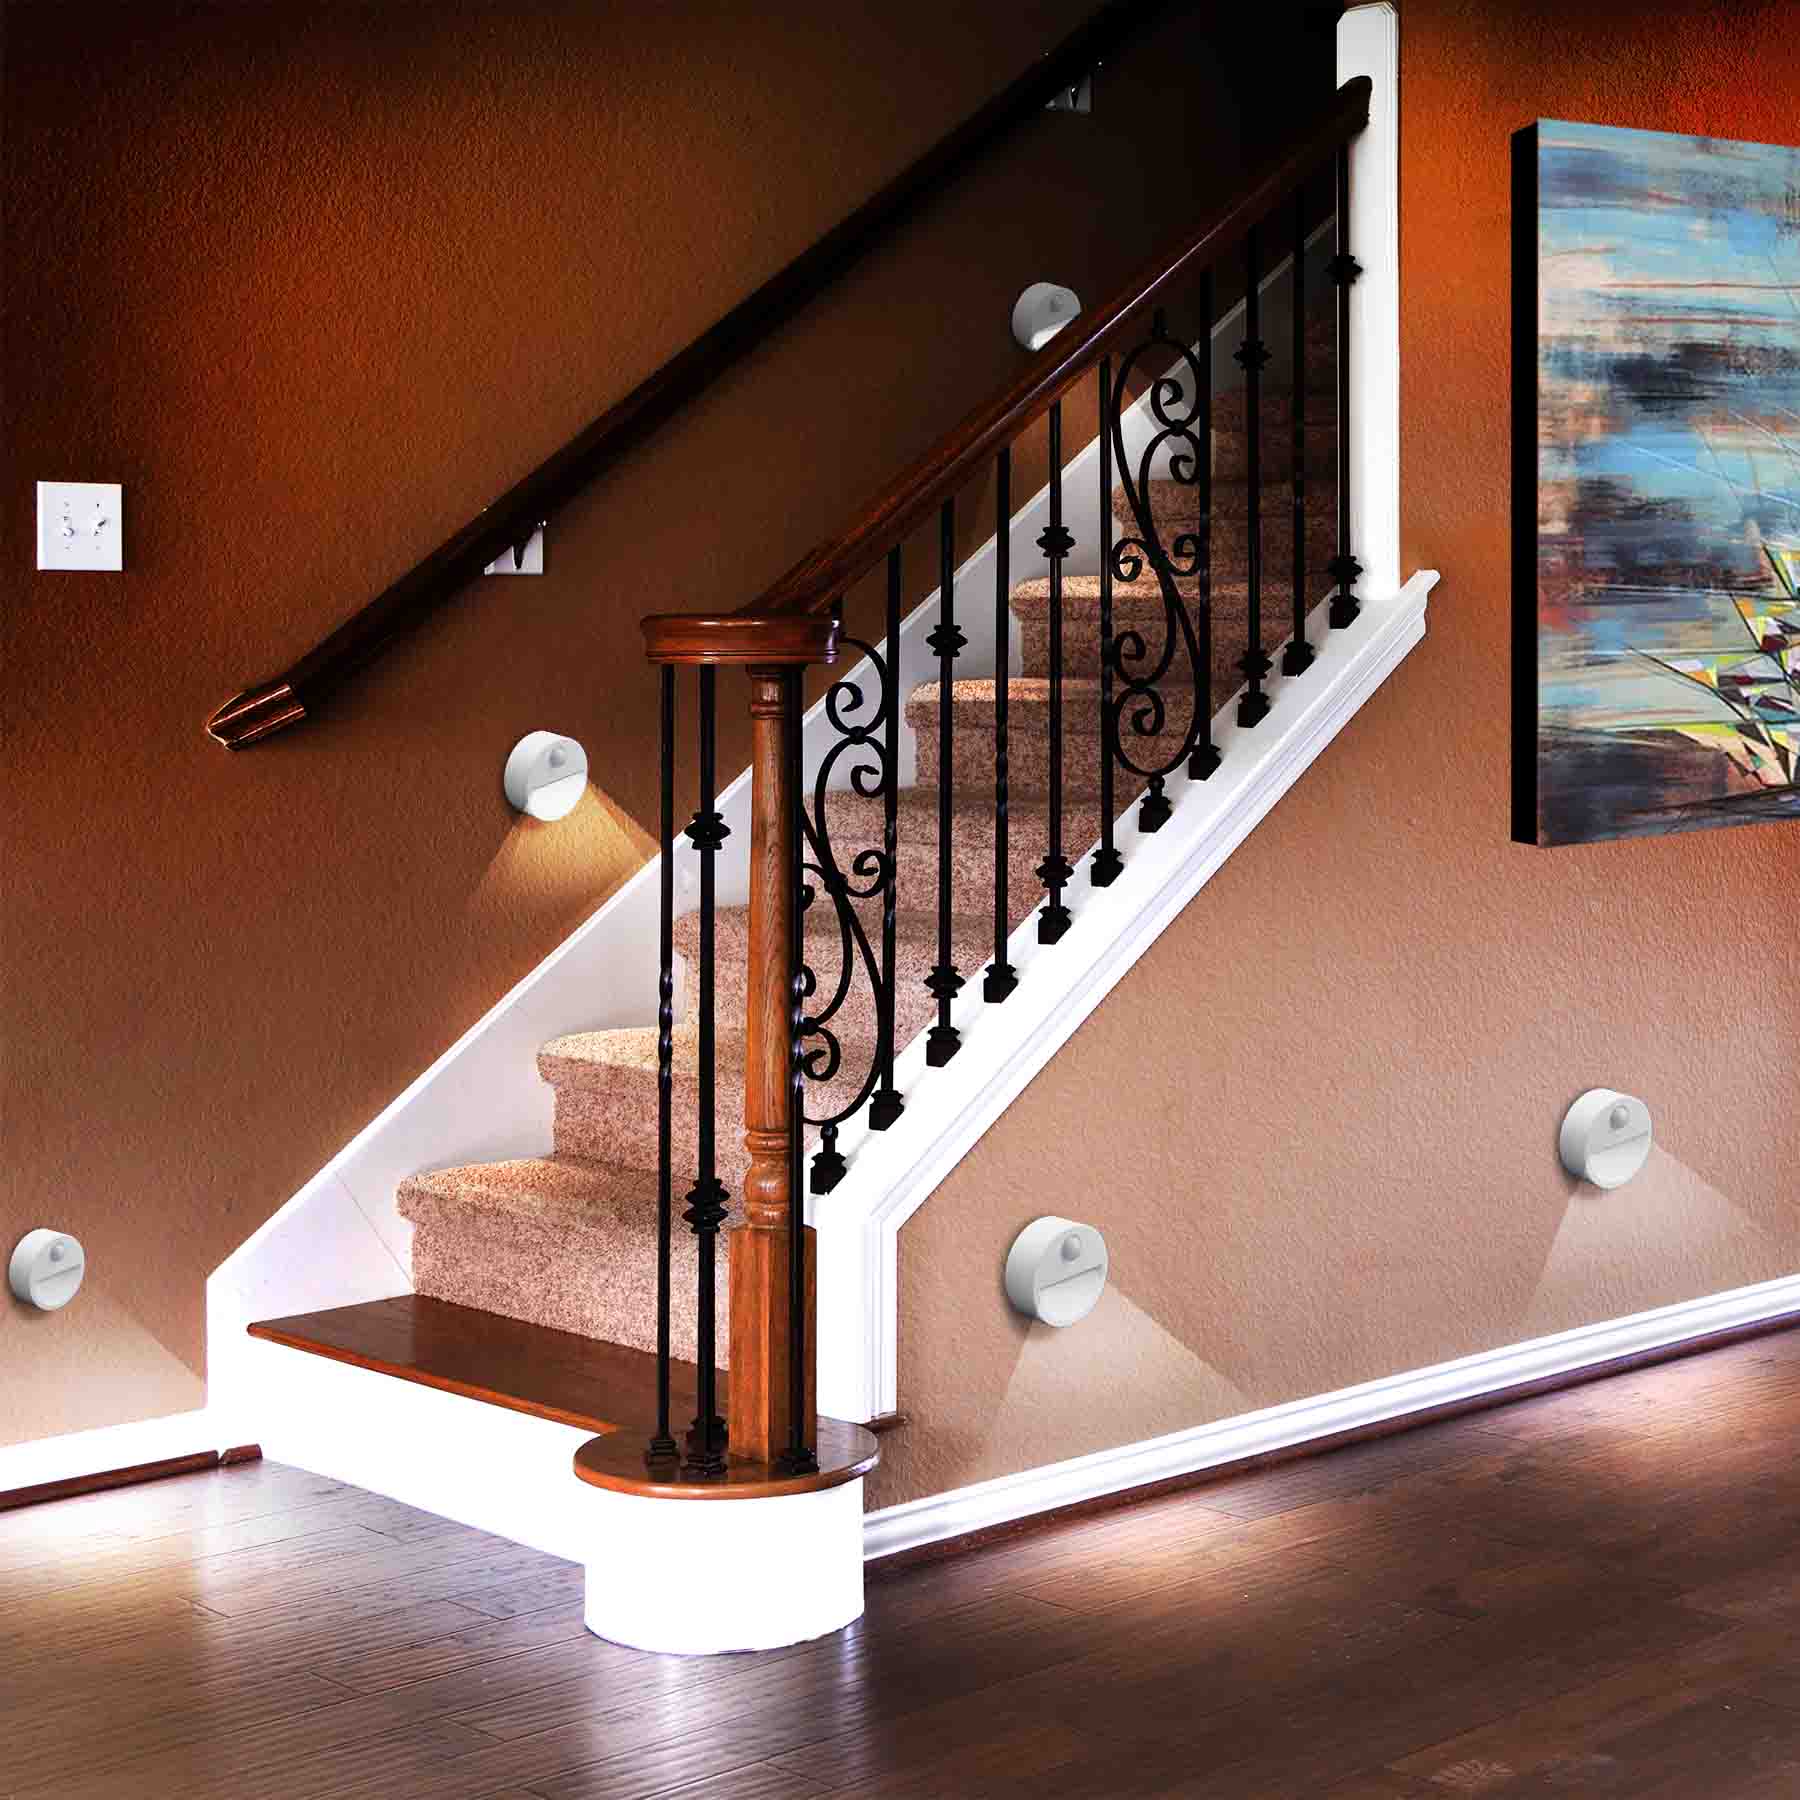 Home Interiors:  Entry Hall and staircase of upscale open house